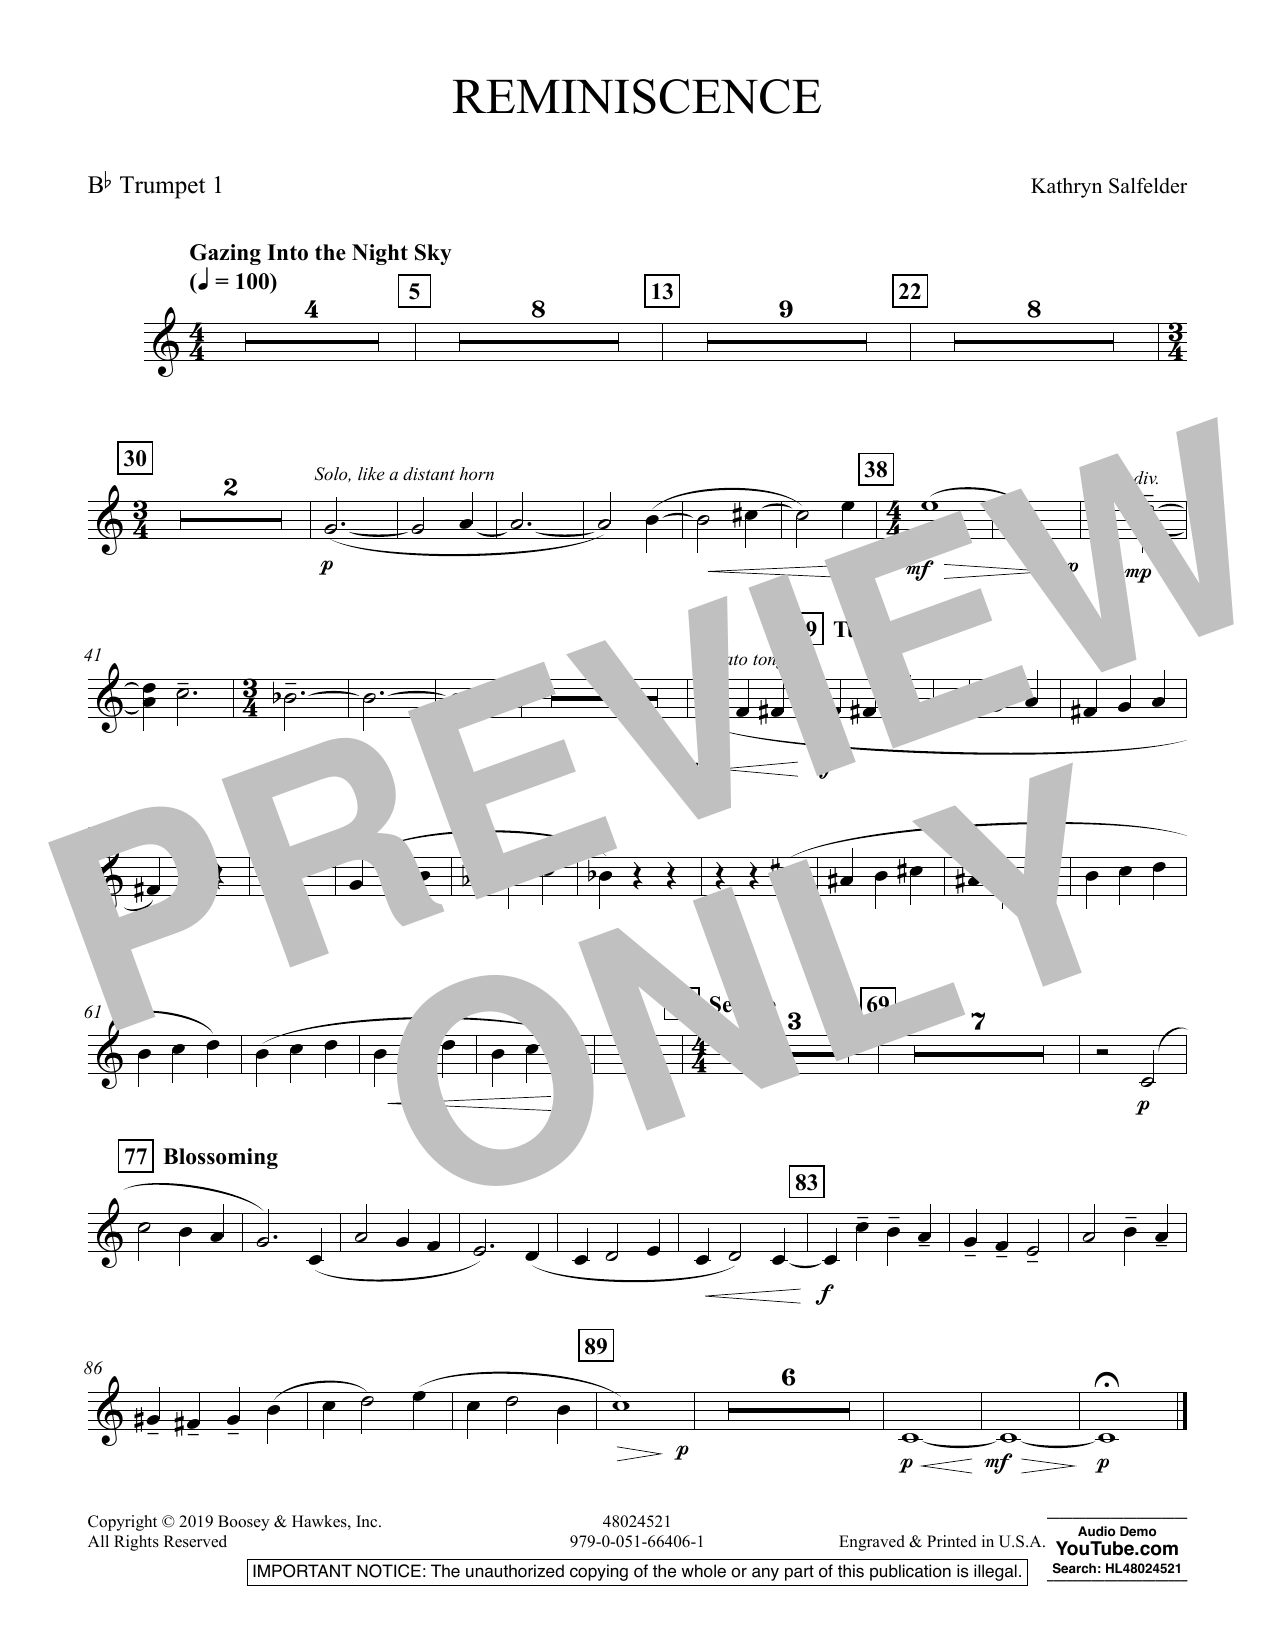 Kathryn Salfelder Reminiscence - Bb Trumpet 1 sheet music preview music notes and score for Concert Band including 1 page(s)